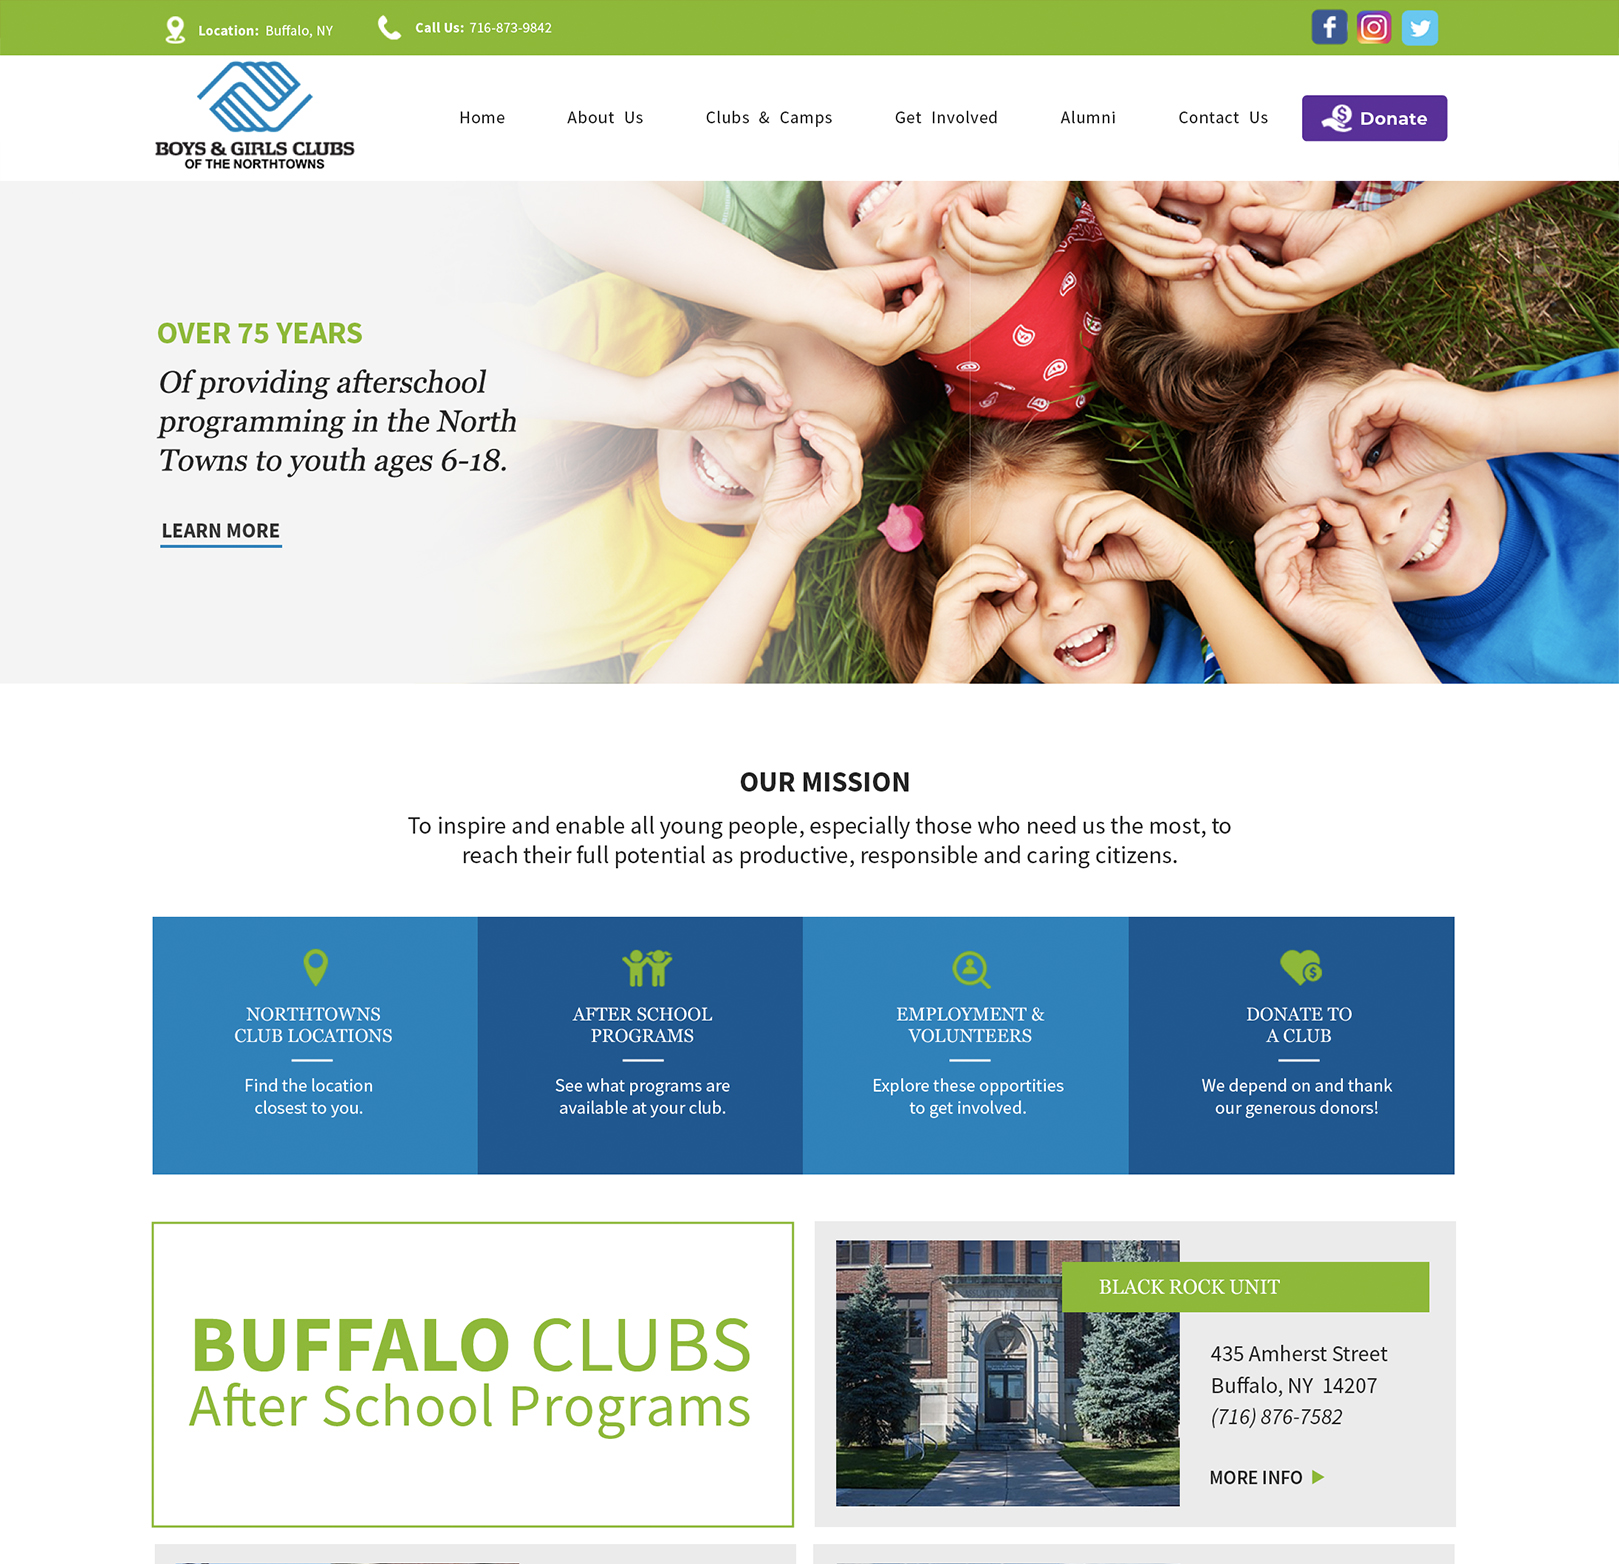 Boy & Girls Clubs of the Northtowns